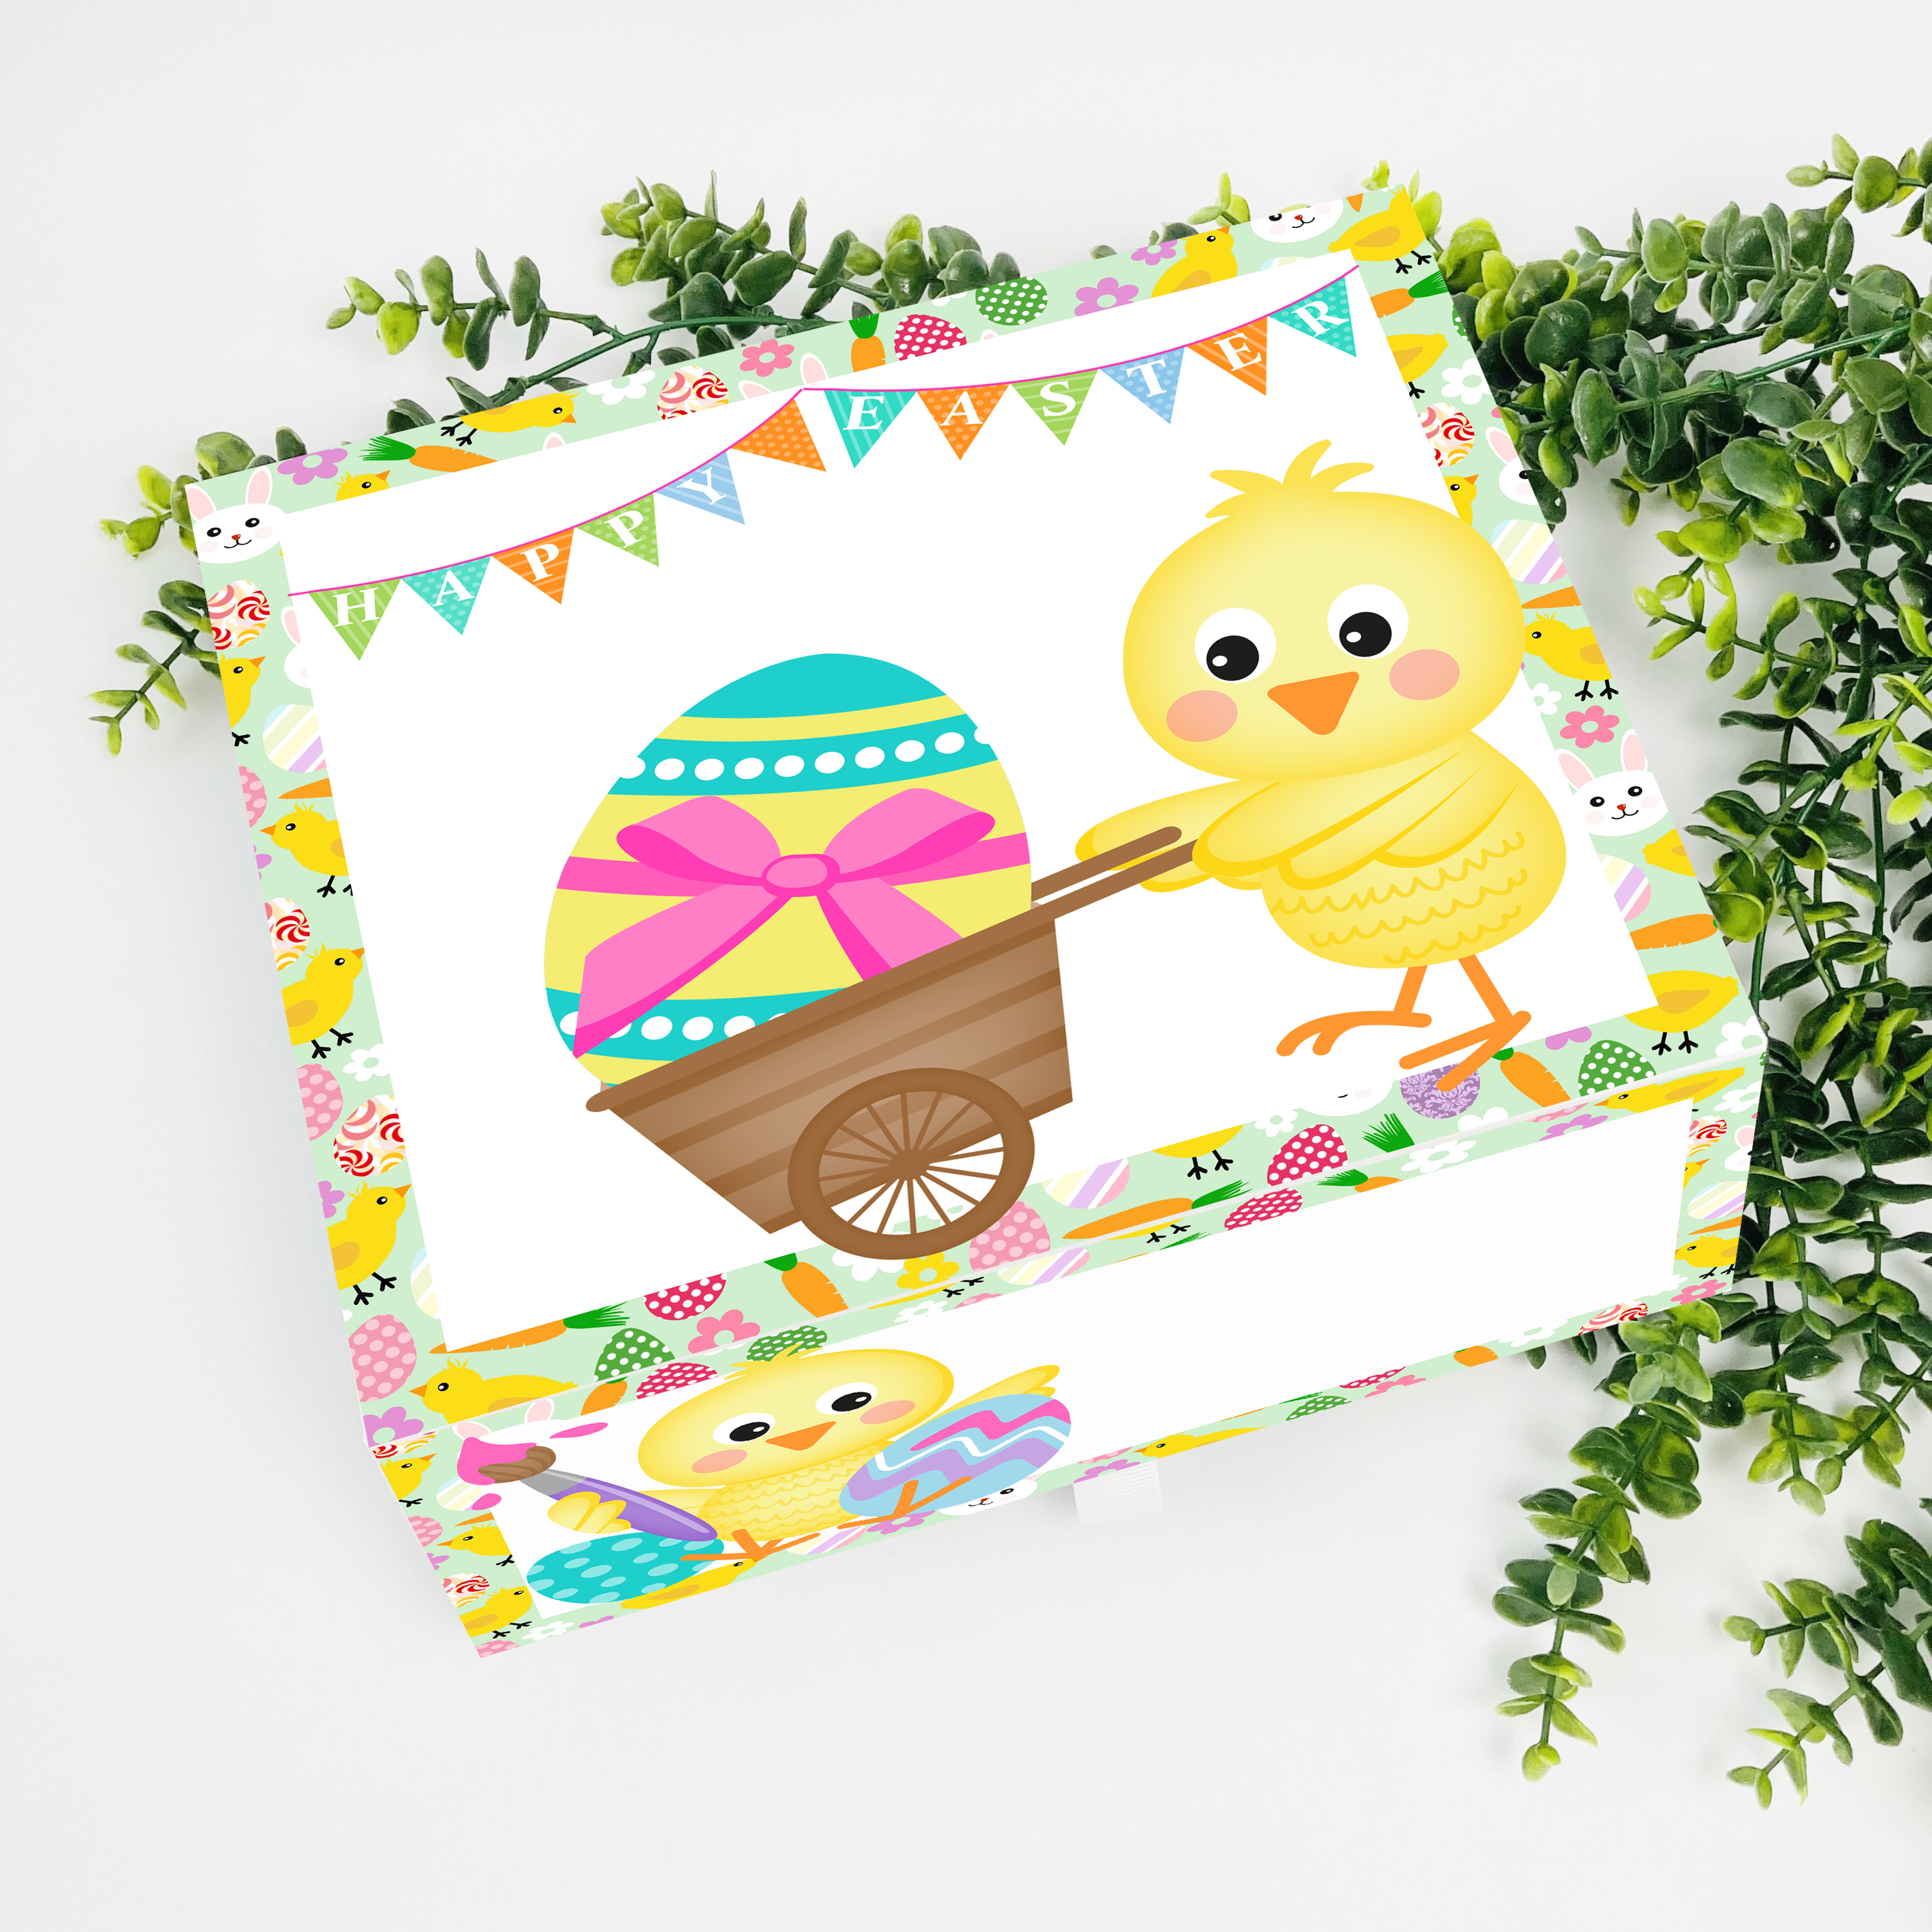 Easter Chick-a Dee Treat Box File Bundle